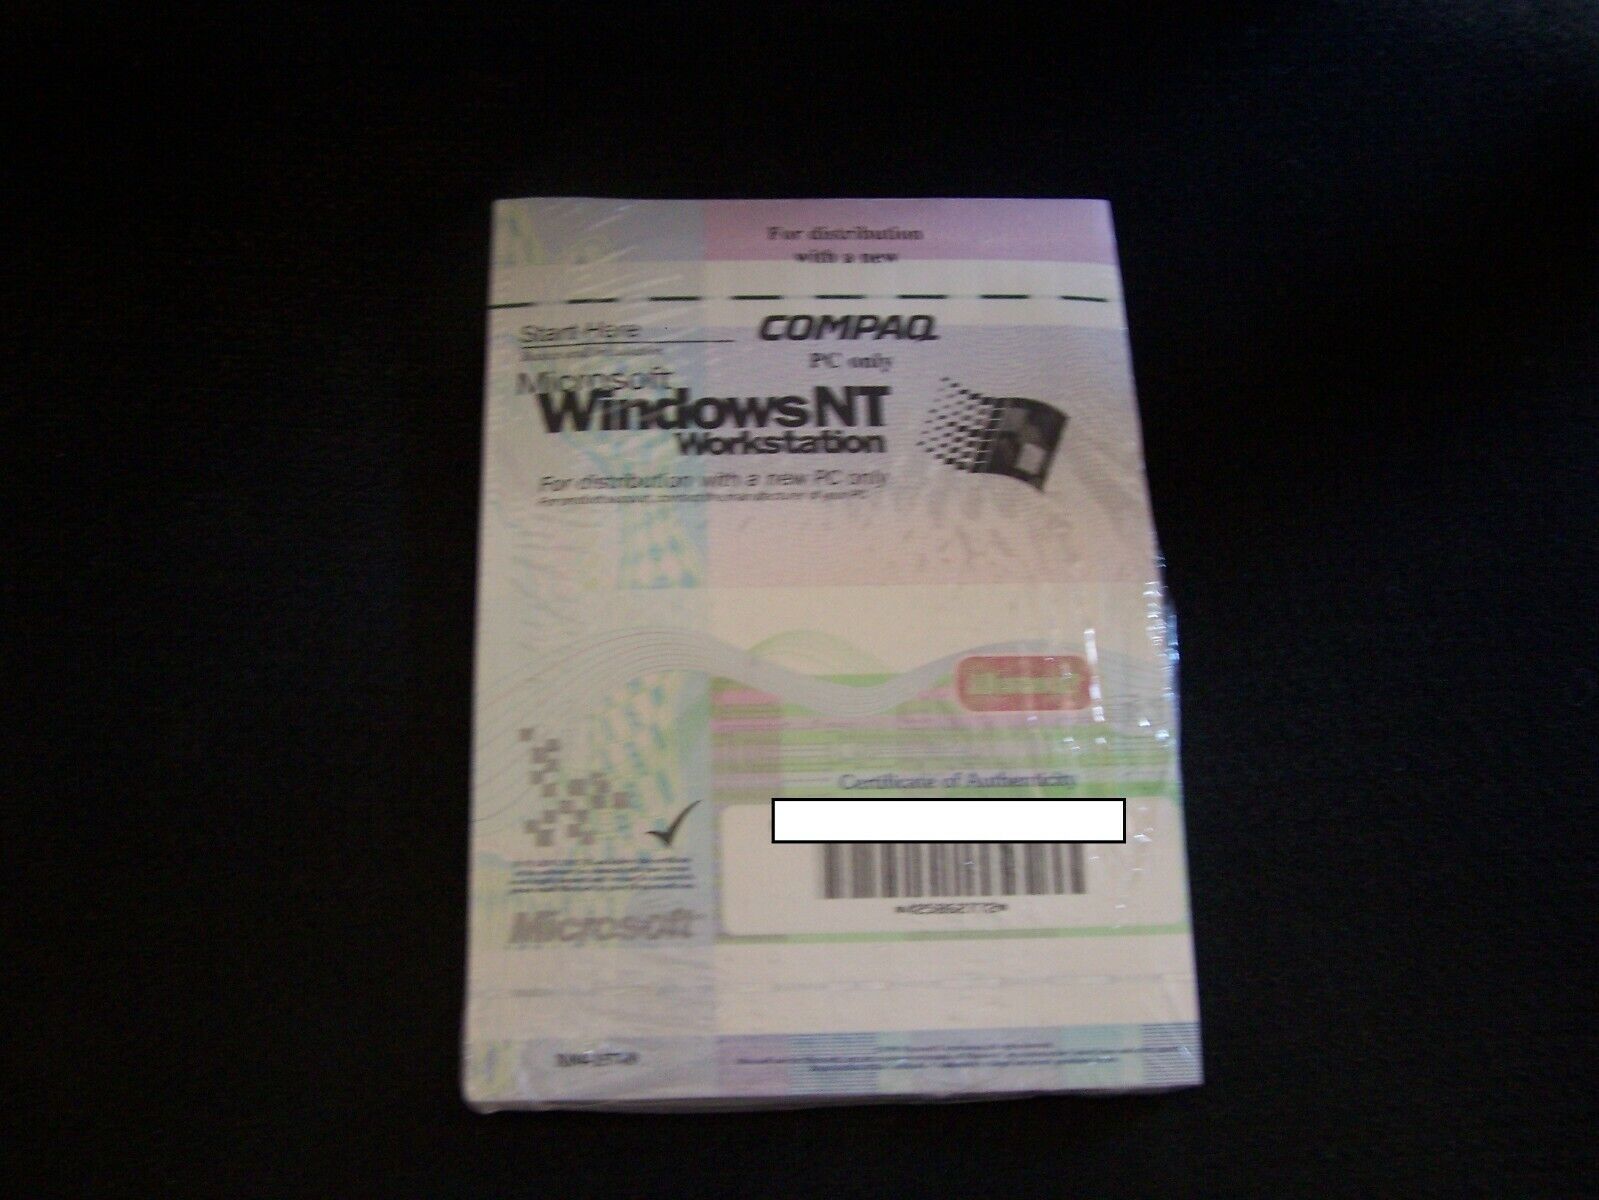 Windows NT Workstation  for Compaq PC only - Estate Sale New Old Stock